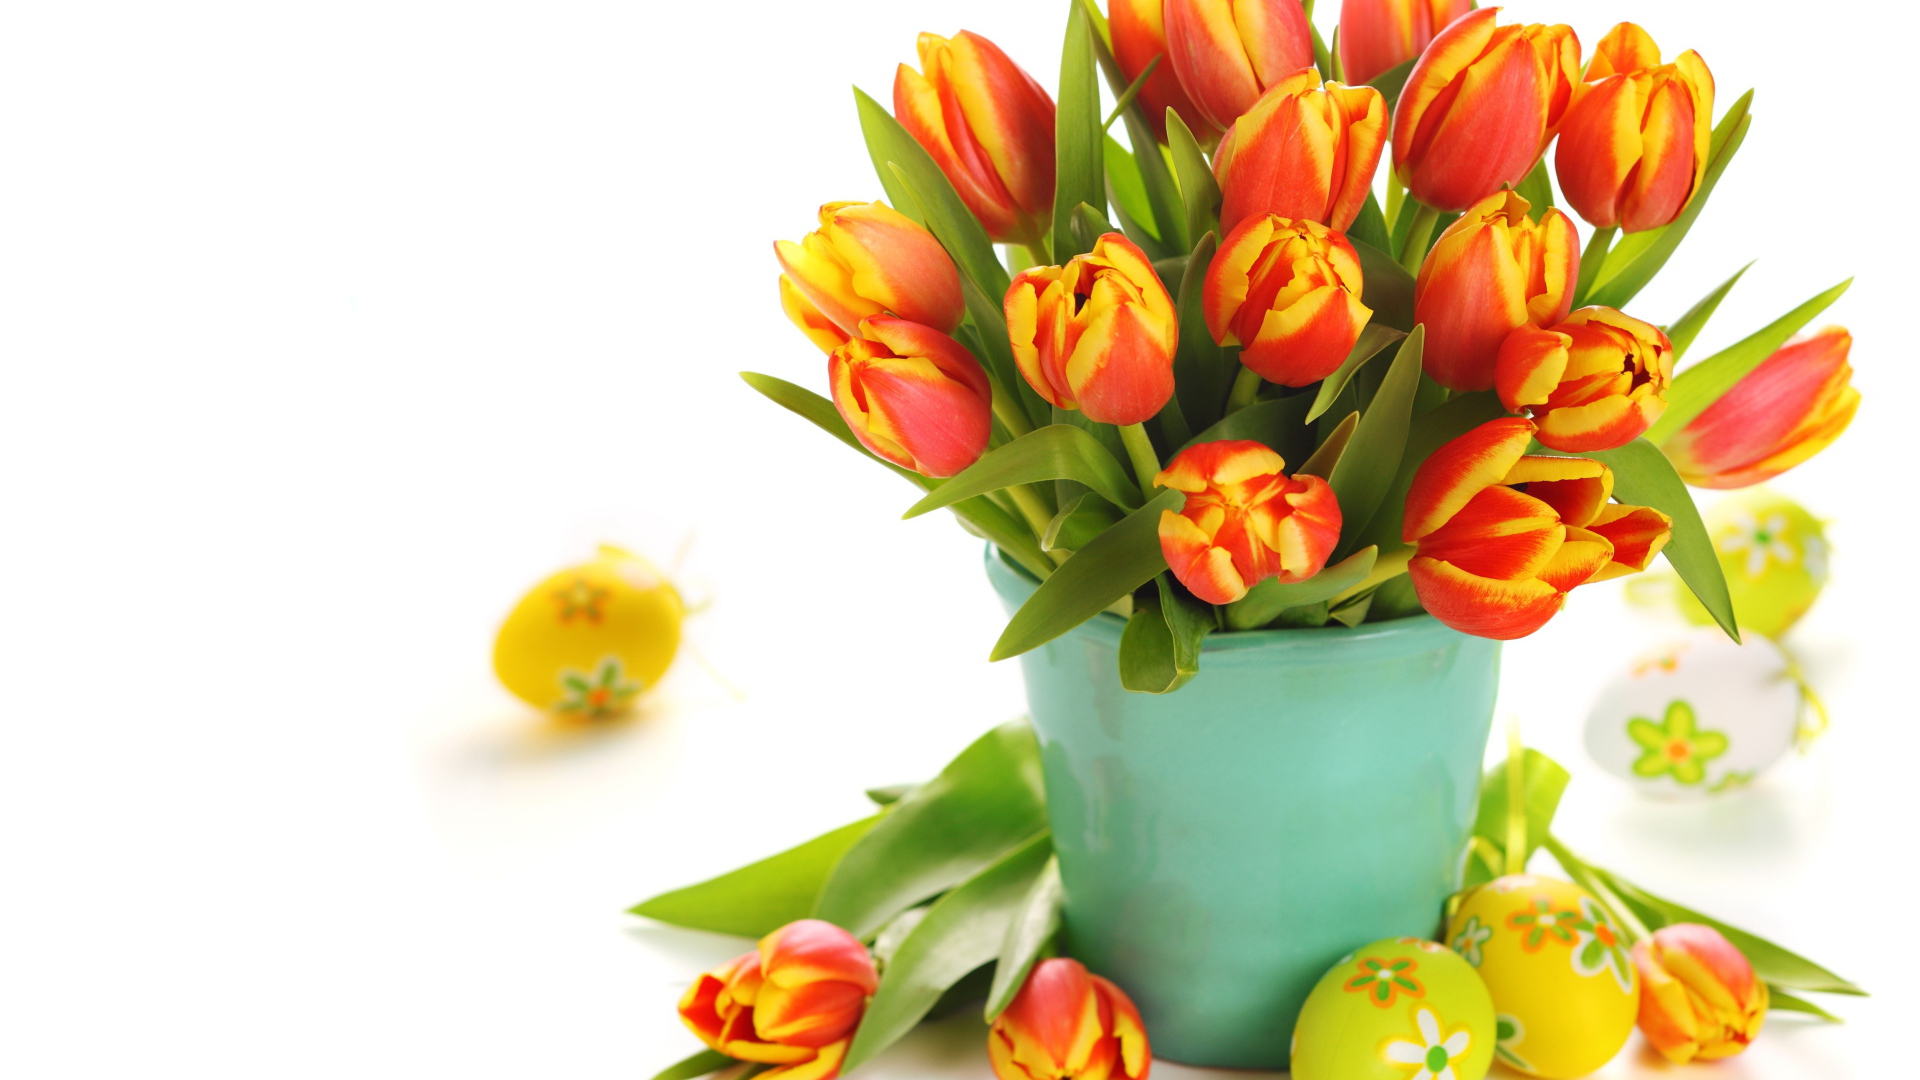 Bouquet of orange tulips with Easter eggs for the Easter holiday Desktop wallpaper 1920x1080